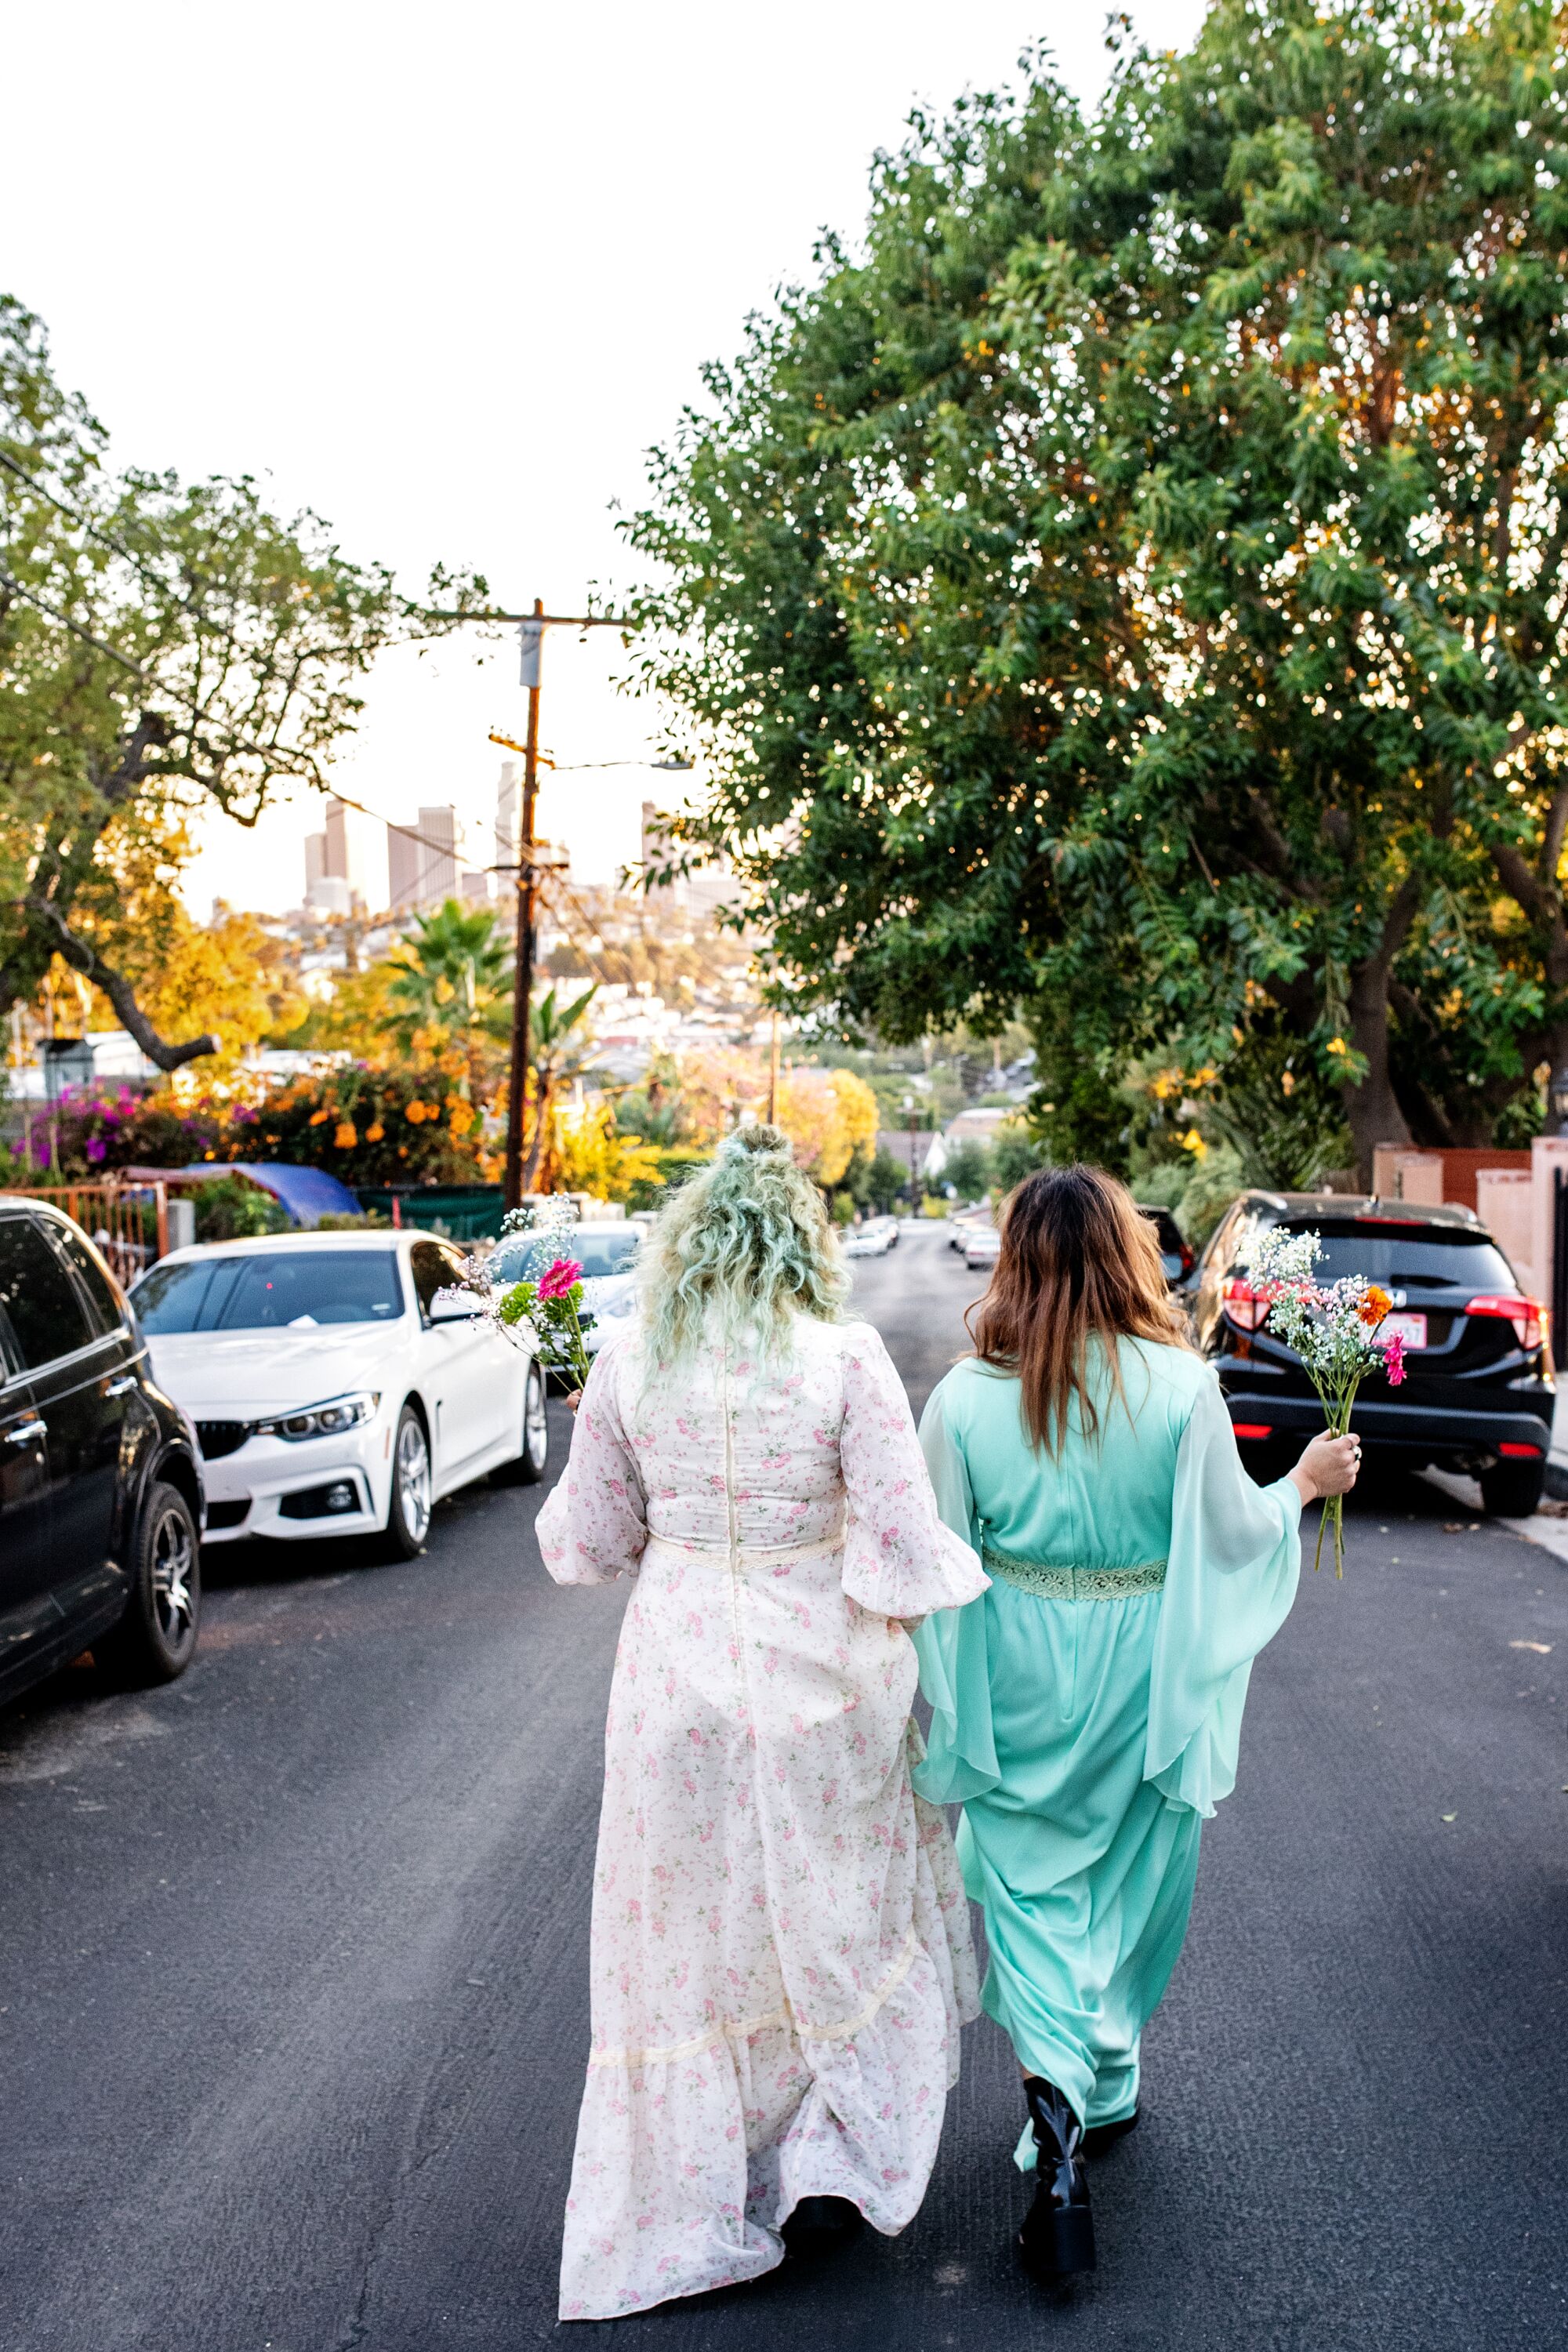 Ursula and Rebecca Recinos walk down the street, their backs to us, flowers in hand.